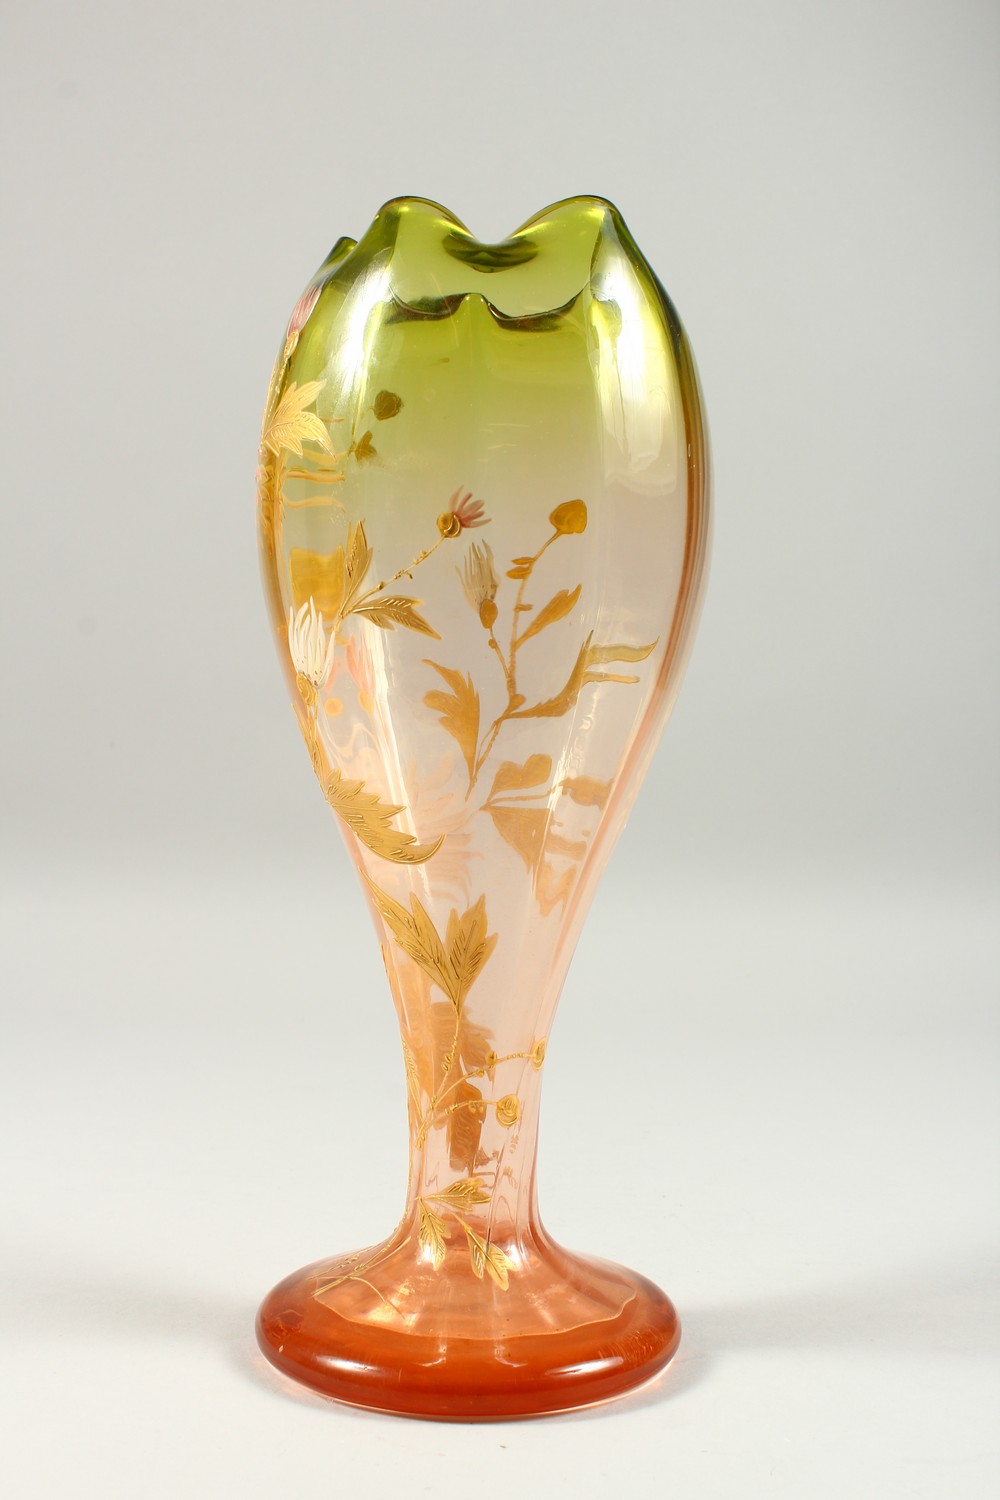 A WEBB'S TYPE BUD SHAPED PEDESTAL VASE, enamel and gilt decorated with flowers. 11.75ins high. - Image 4 of 7